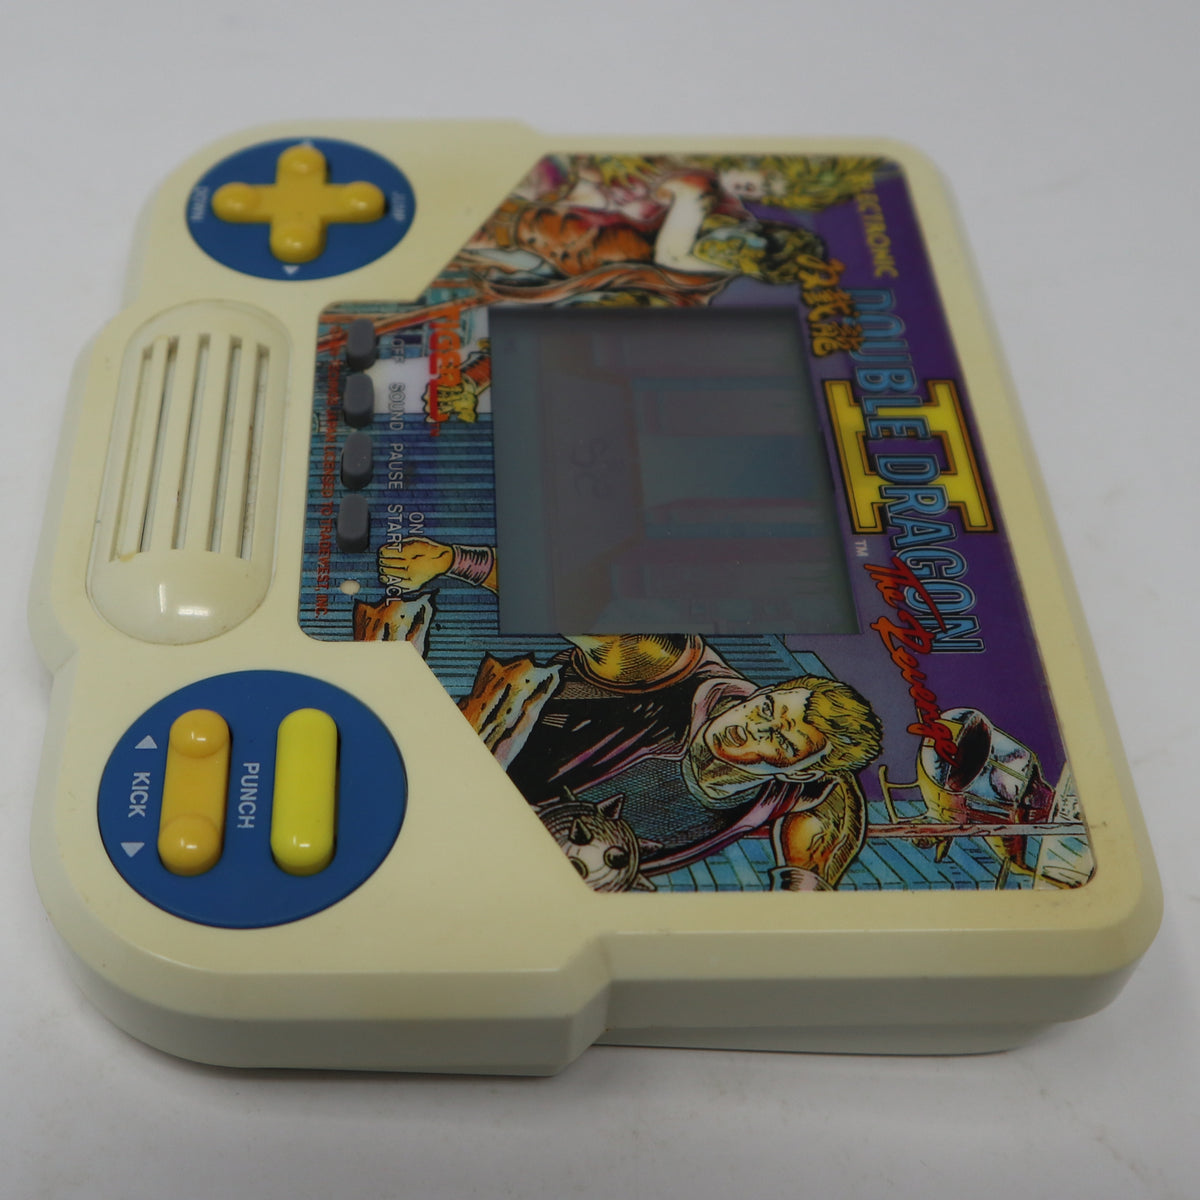 Tiger's LCD Handheld DOUBLE DRAGON Game (1988)